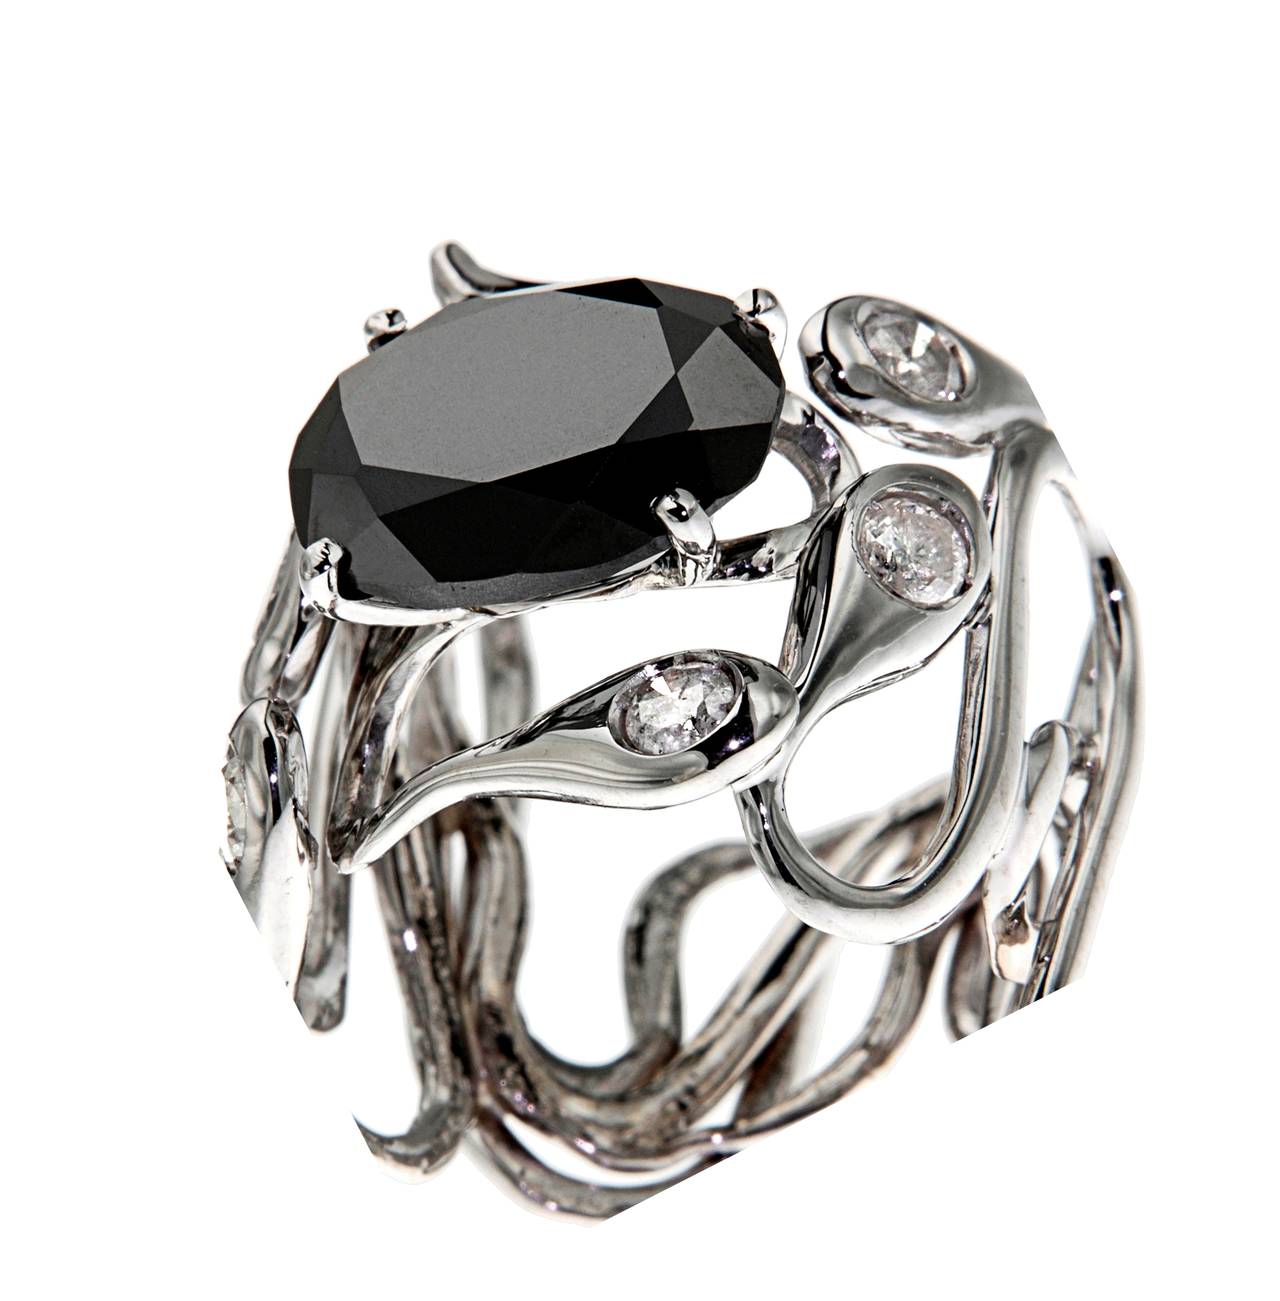 Women's Black White Diamonds 18 Karat White Gold Cocktail Ring Handcrafted In Italy 